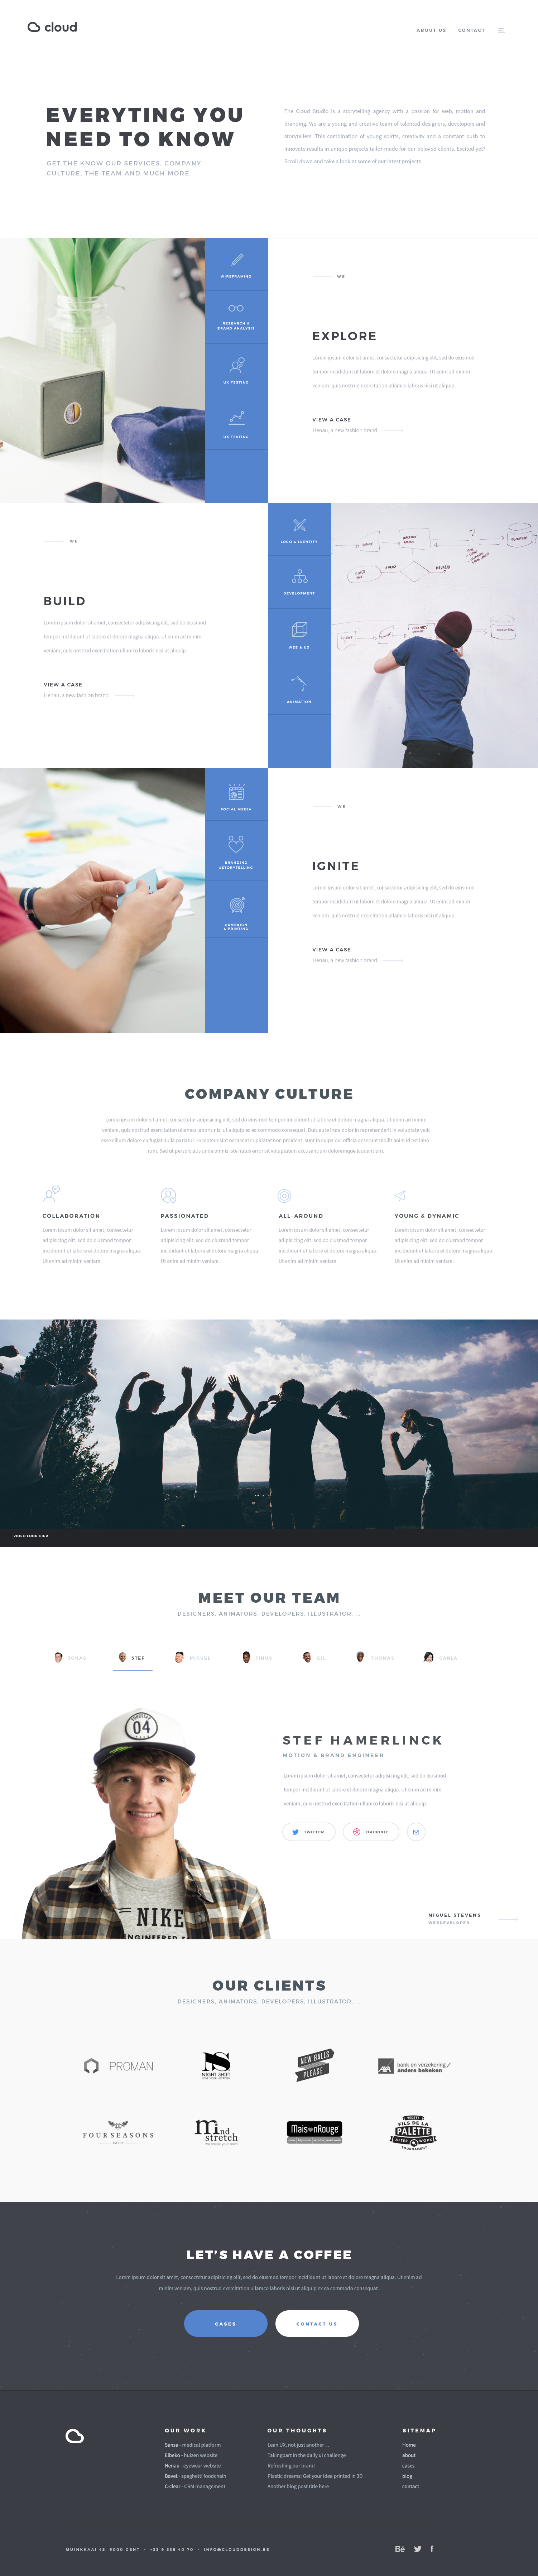 Dribbble - about.jpg by Gil